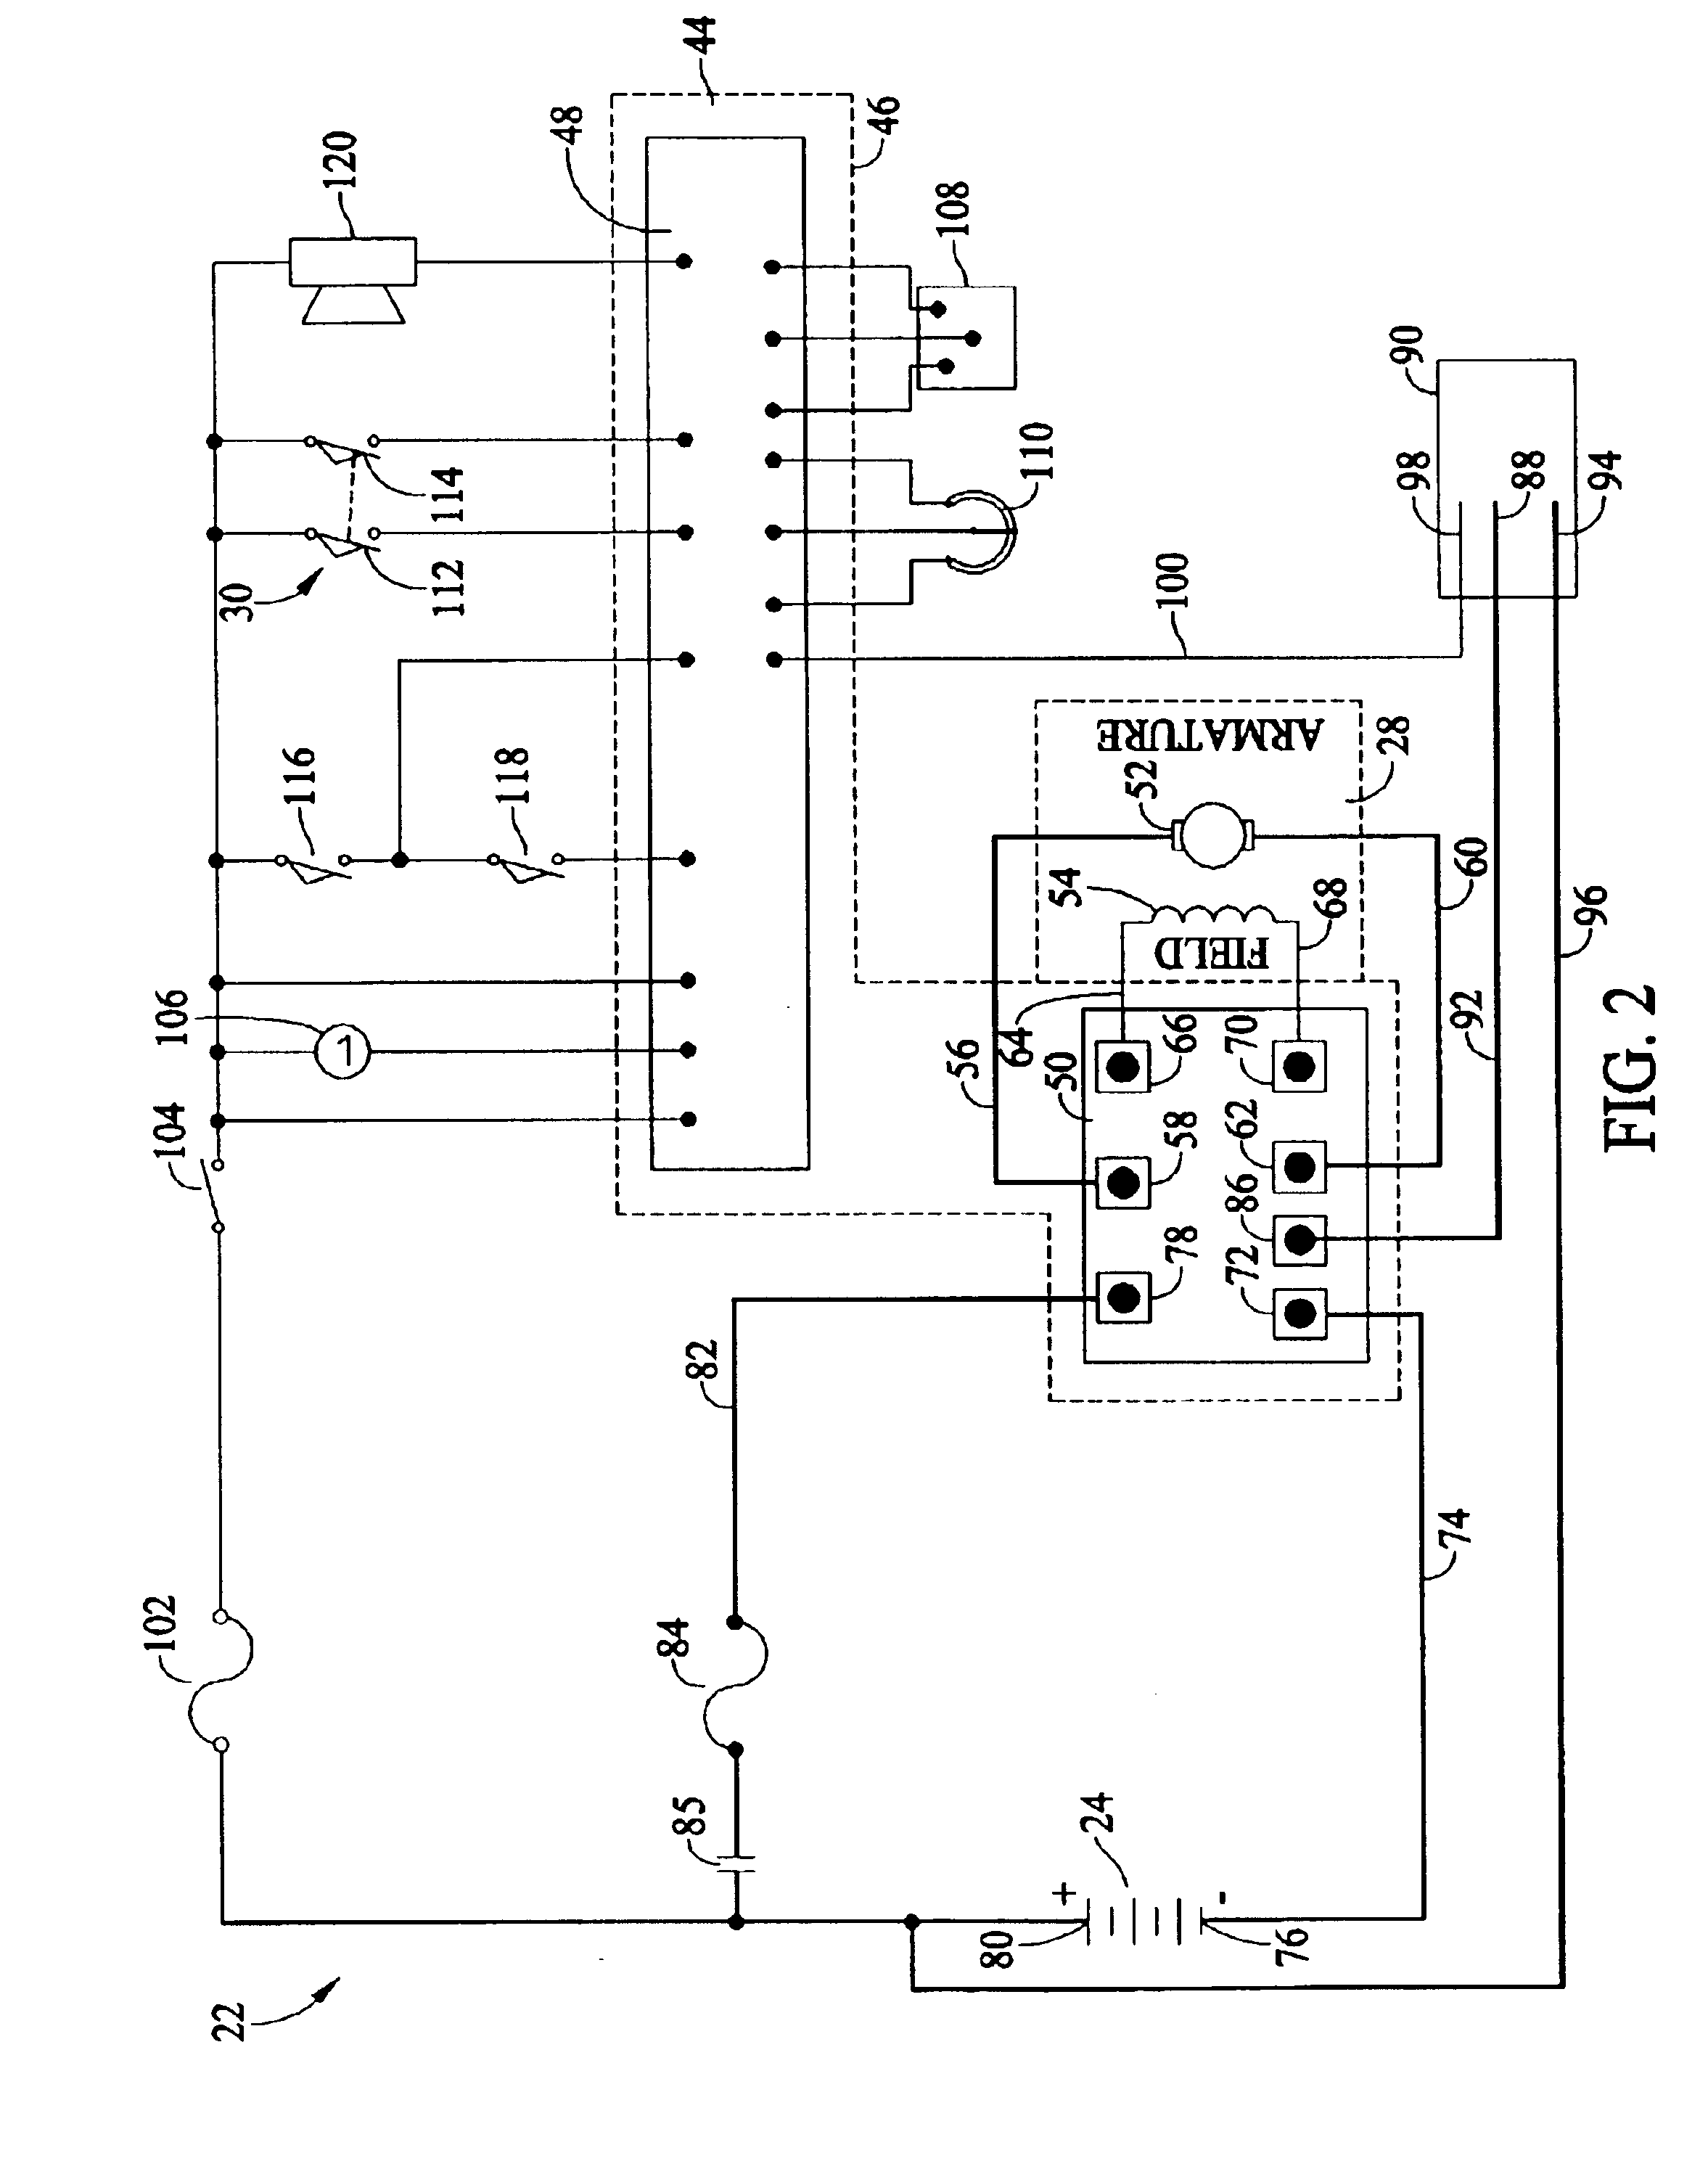 Methods and apparatus for controlling electric vehicle battery charger and motor using a single unitary controller